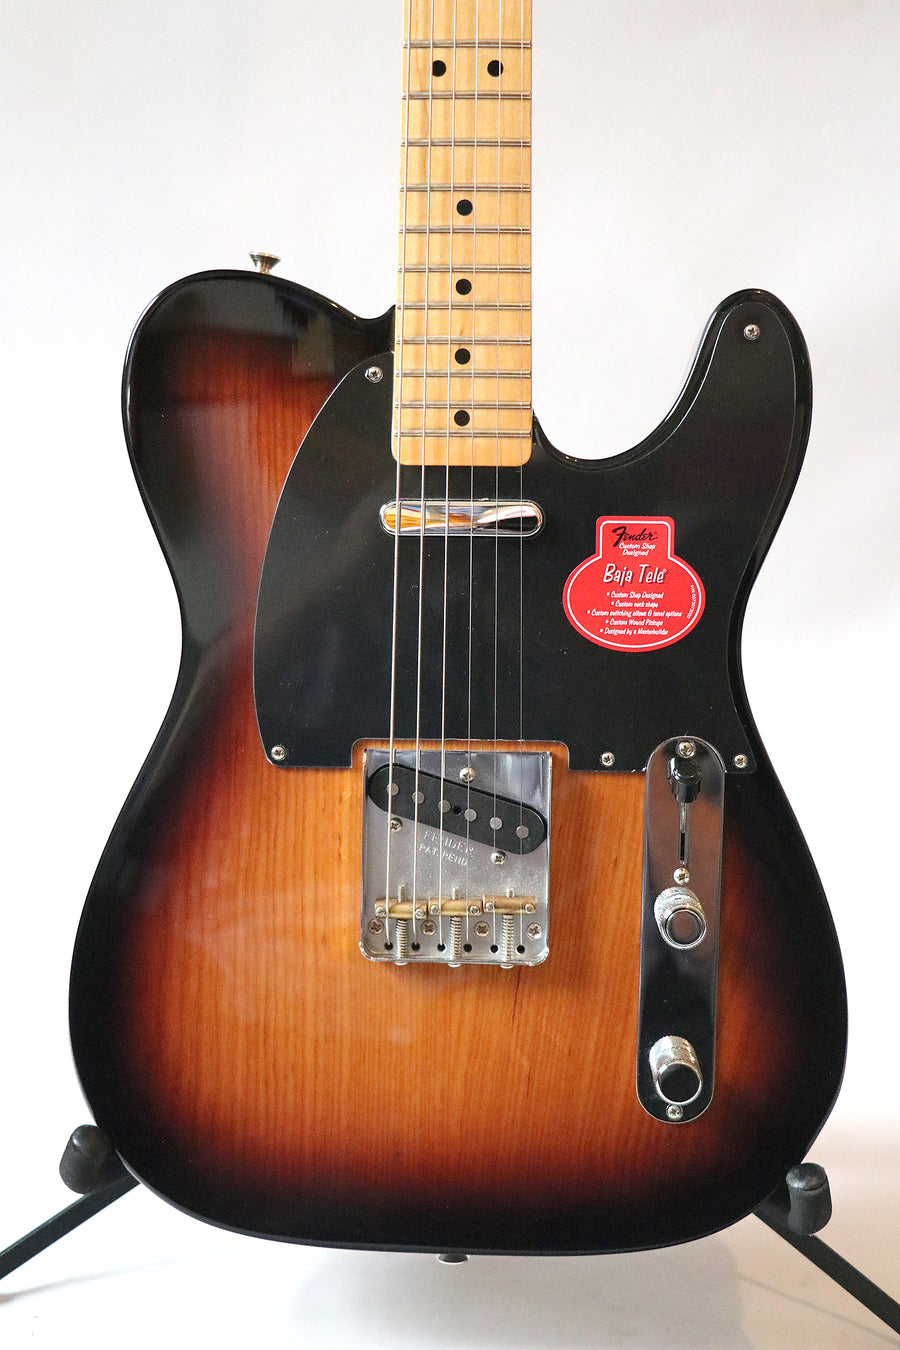 Fender Classic Player Baja Telecaster – The Guitar Colonel